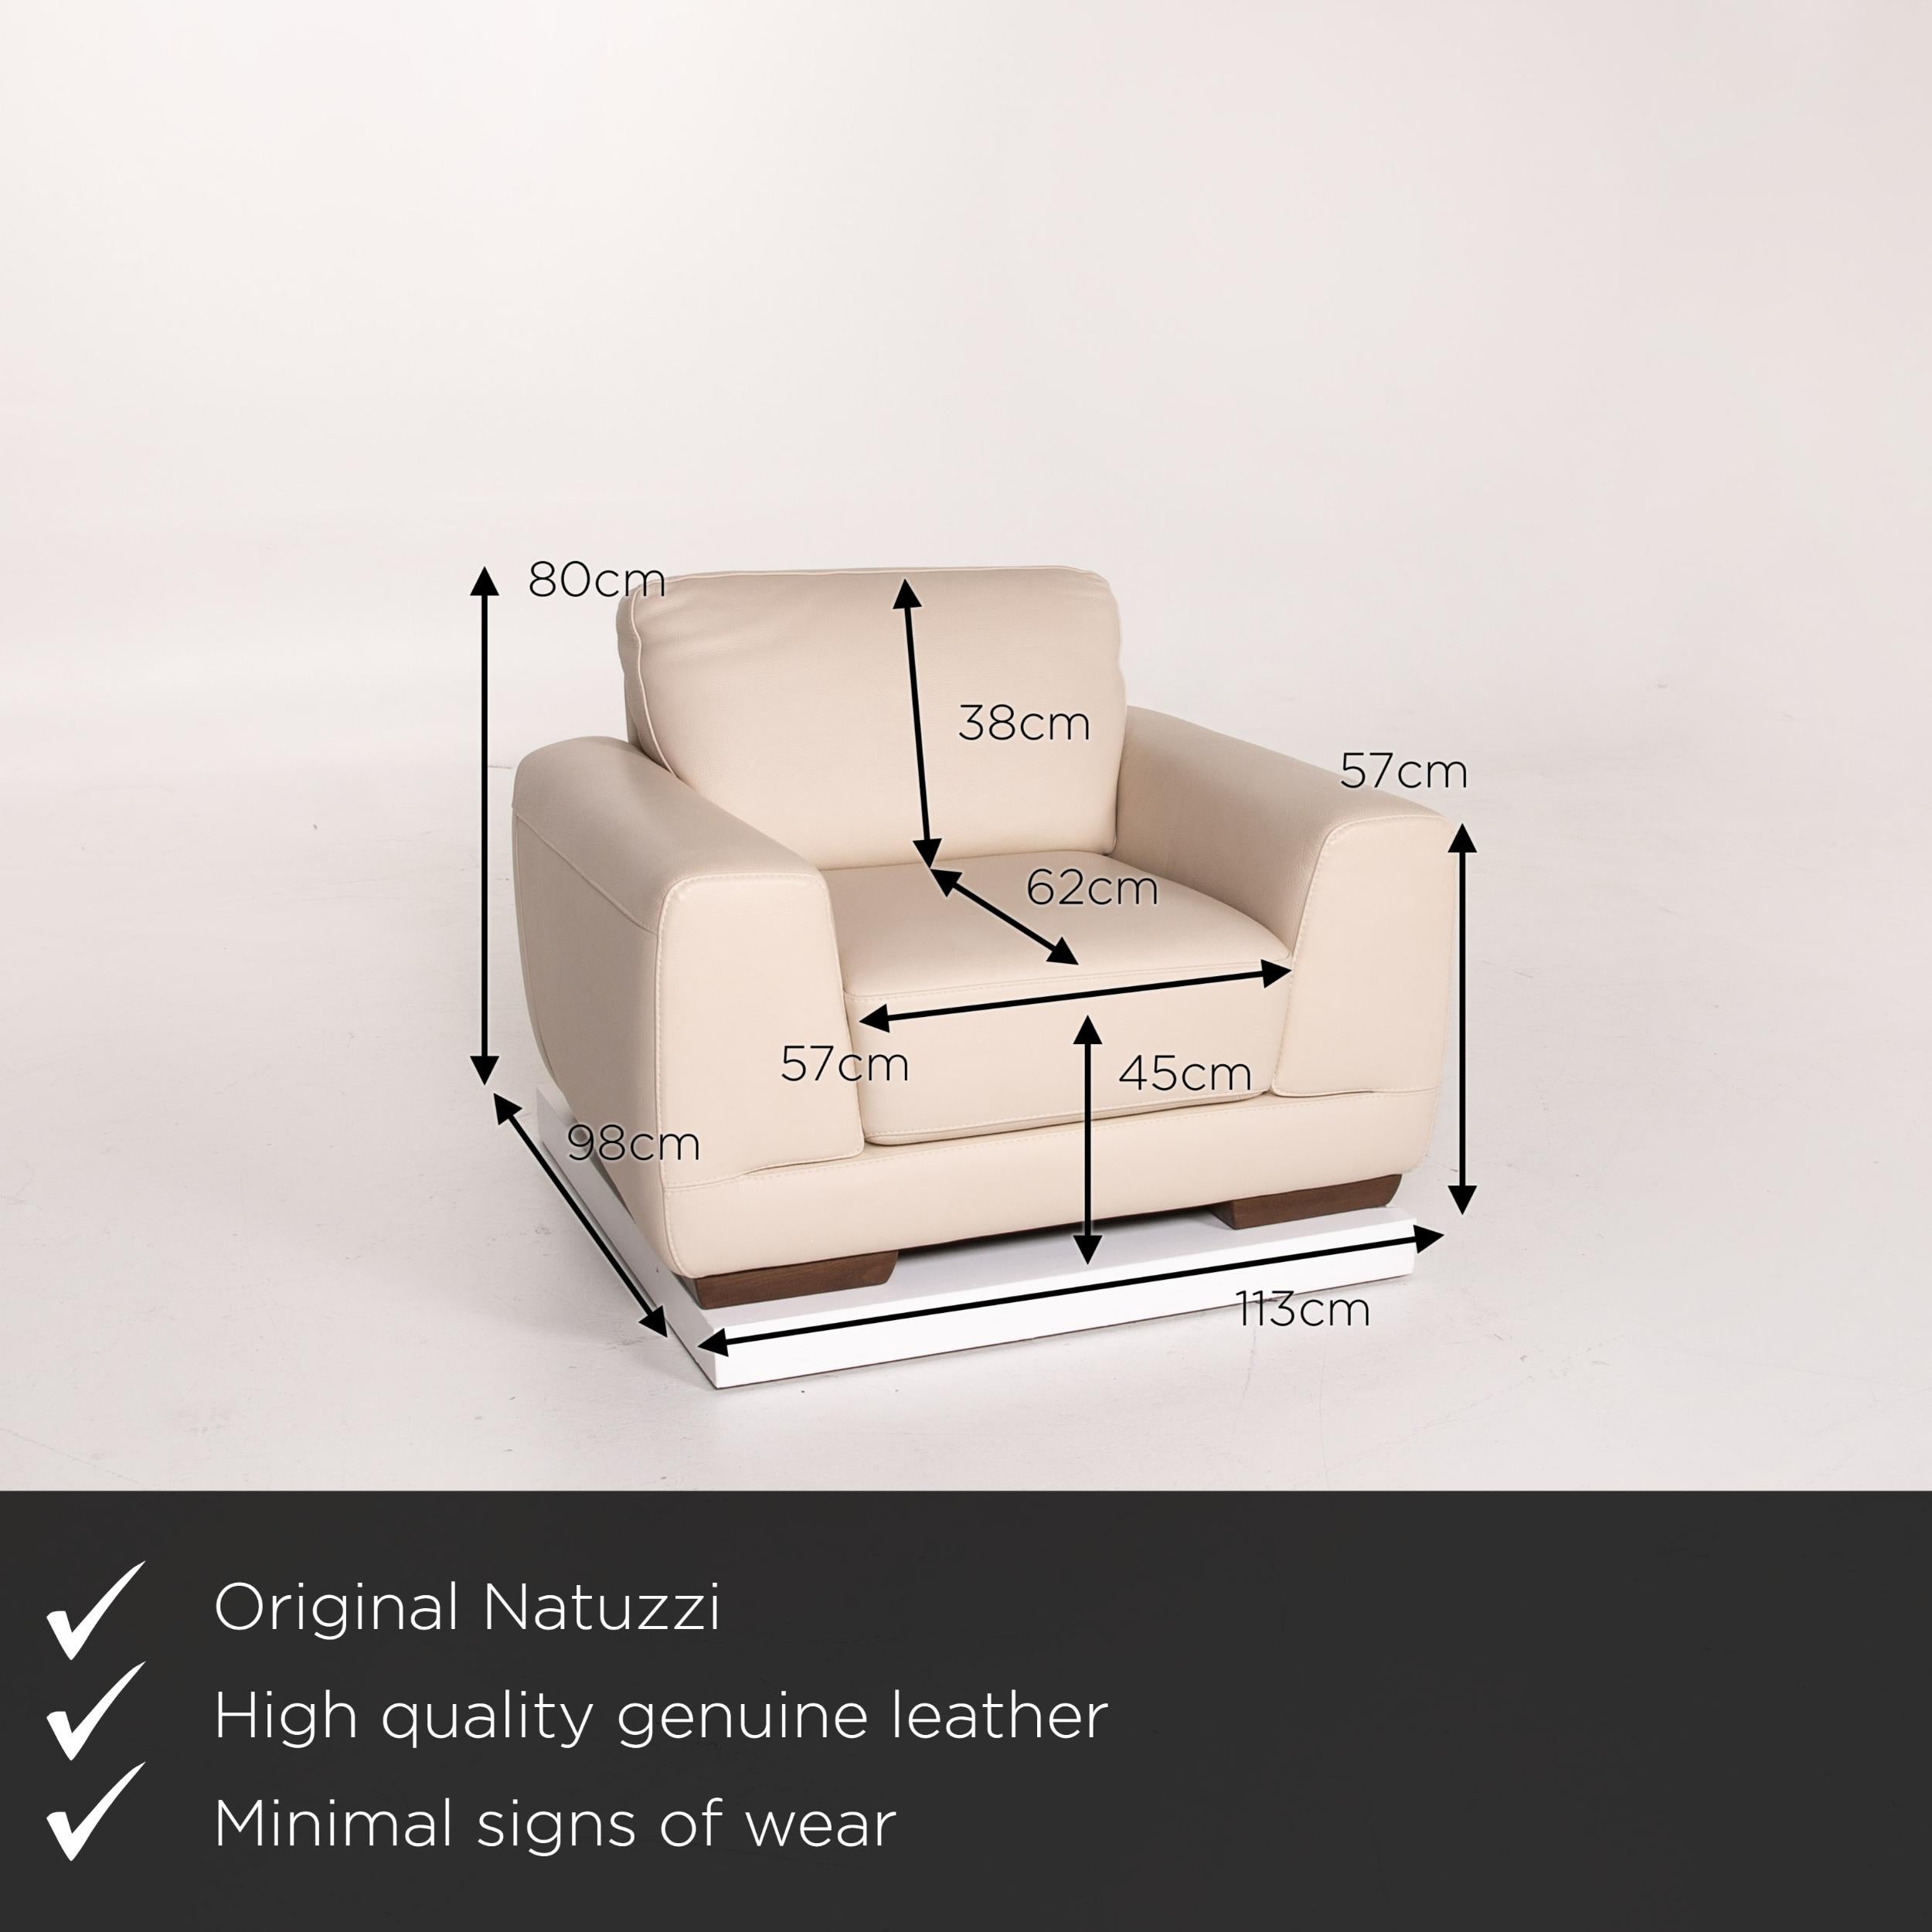 We present to you a Natuzzi leather armchair cream.


 Product measurements in centimeters:
 

Depth 98
Width 113
Height 80
Seat height 45
Rest height 57
Seat depth 62
Seat width 57
Back height 38.
 